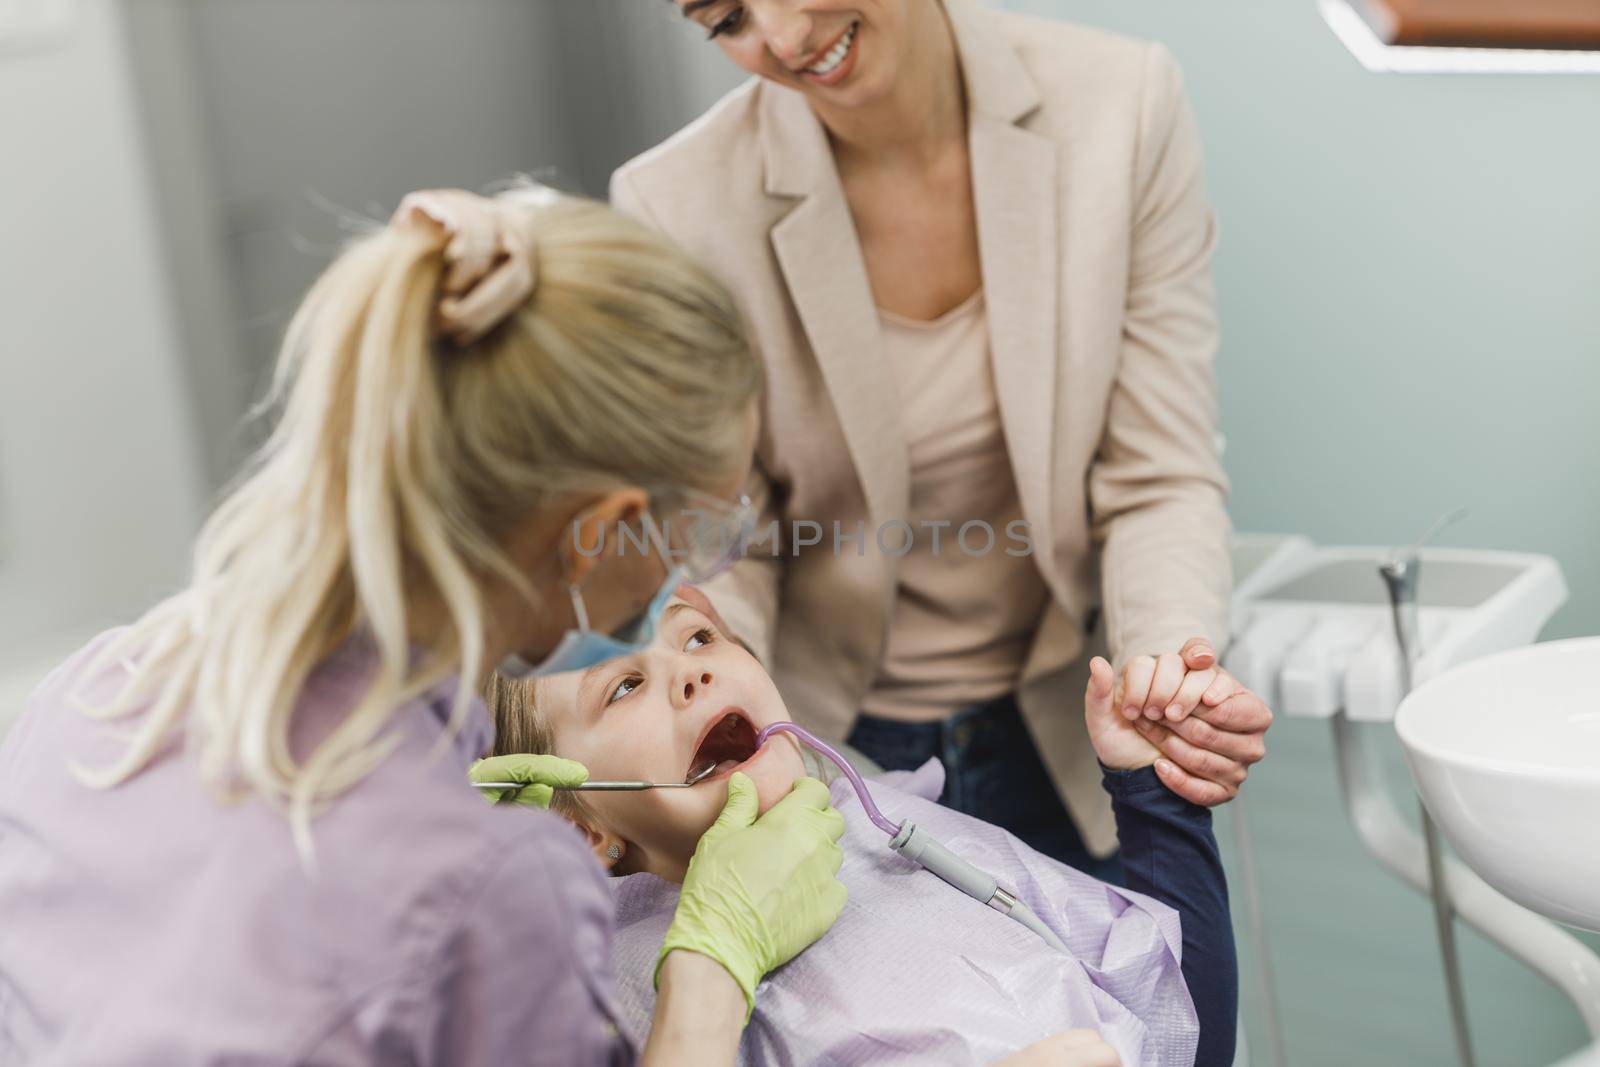 Little Girl At The Dentist by MilanMarkovic78